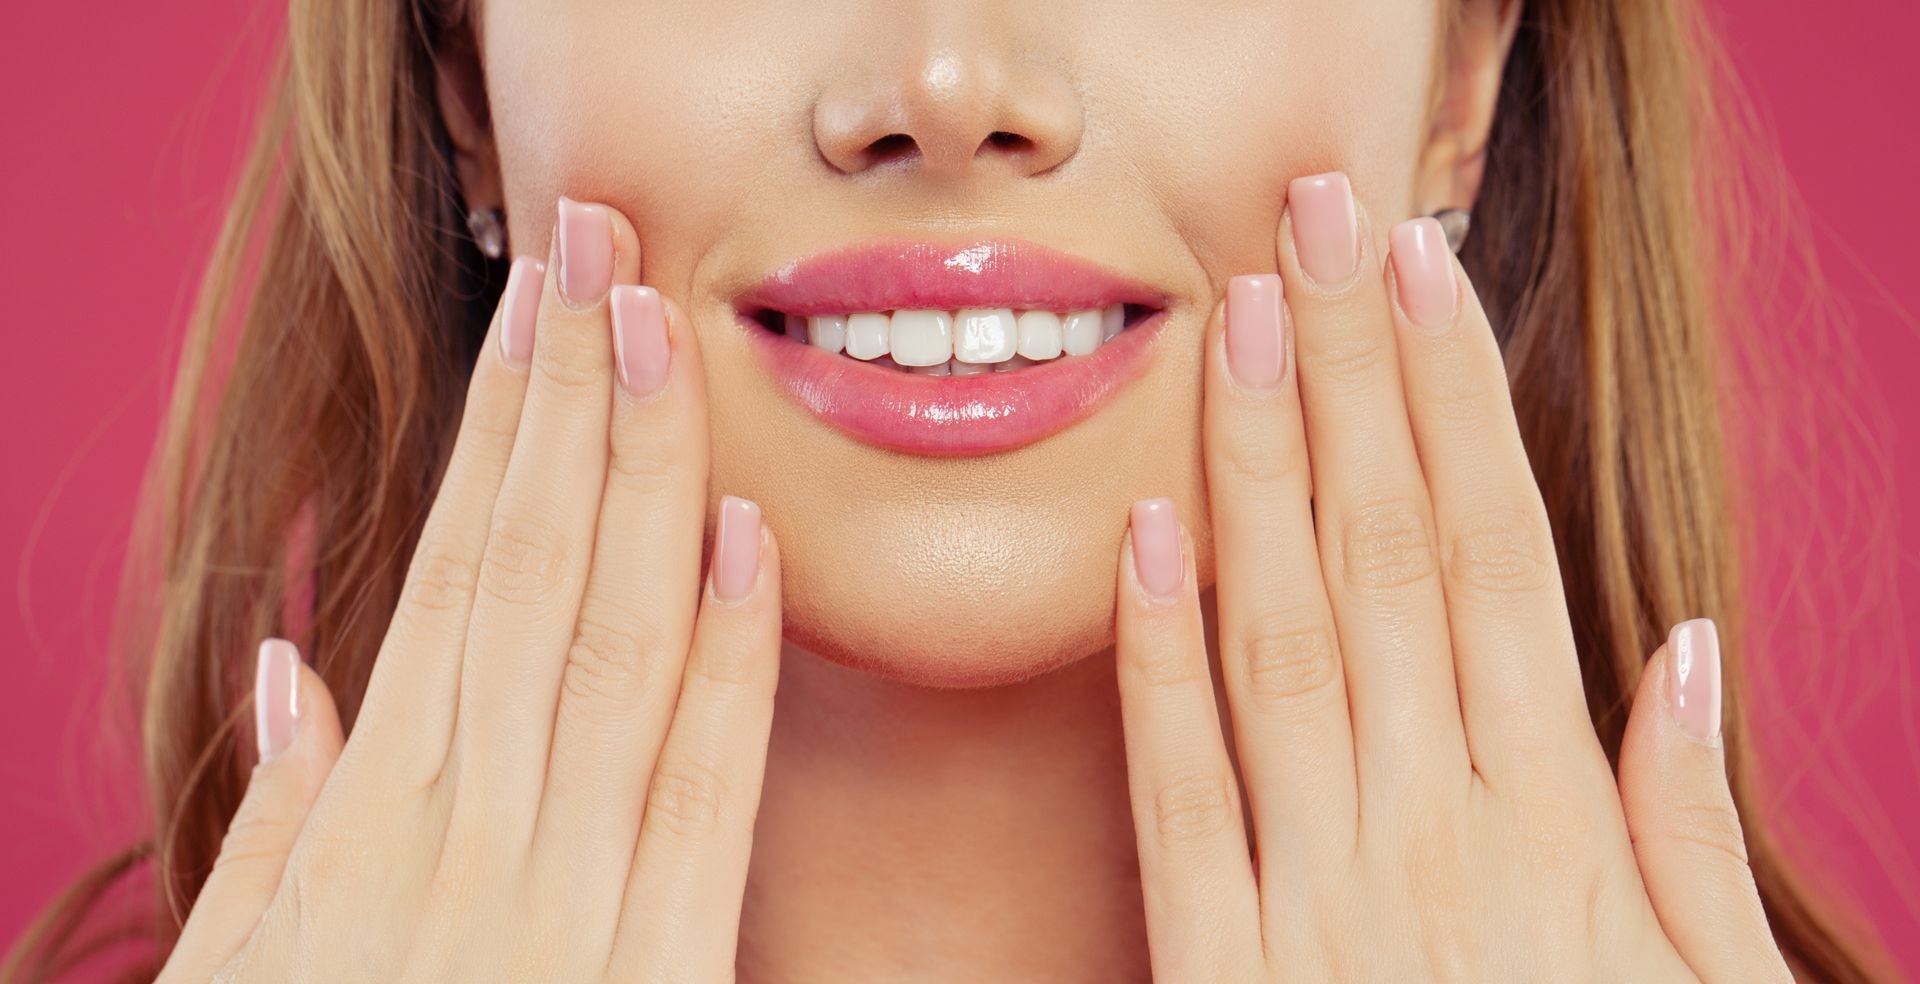 Beautiful woman smiling and showing her hand with manicure nails with natural pink nail polish. Makeup lips with pink color glossy  lipstick